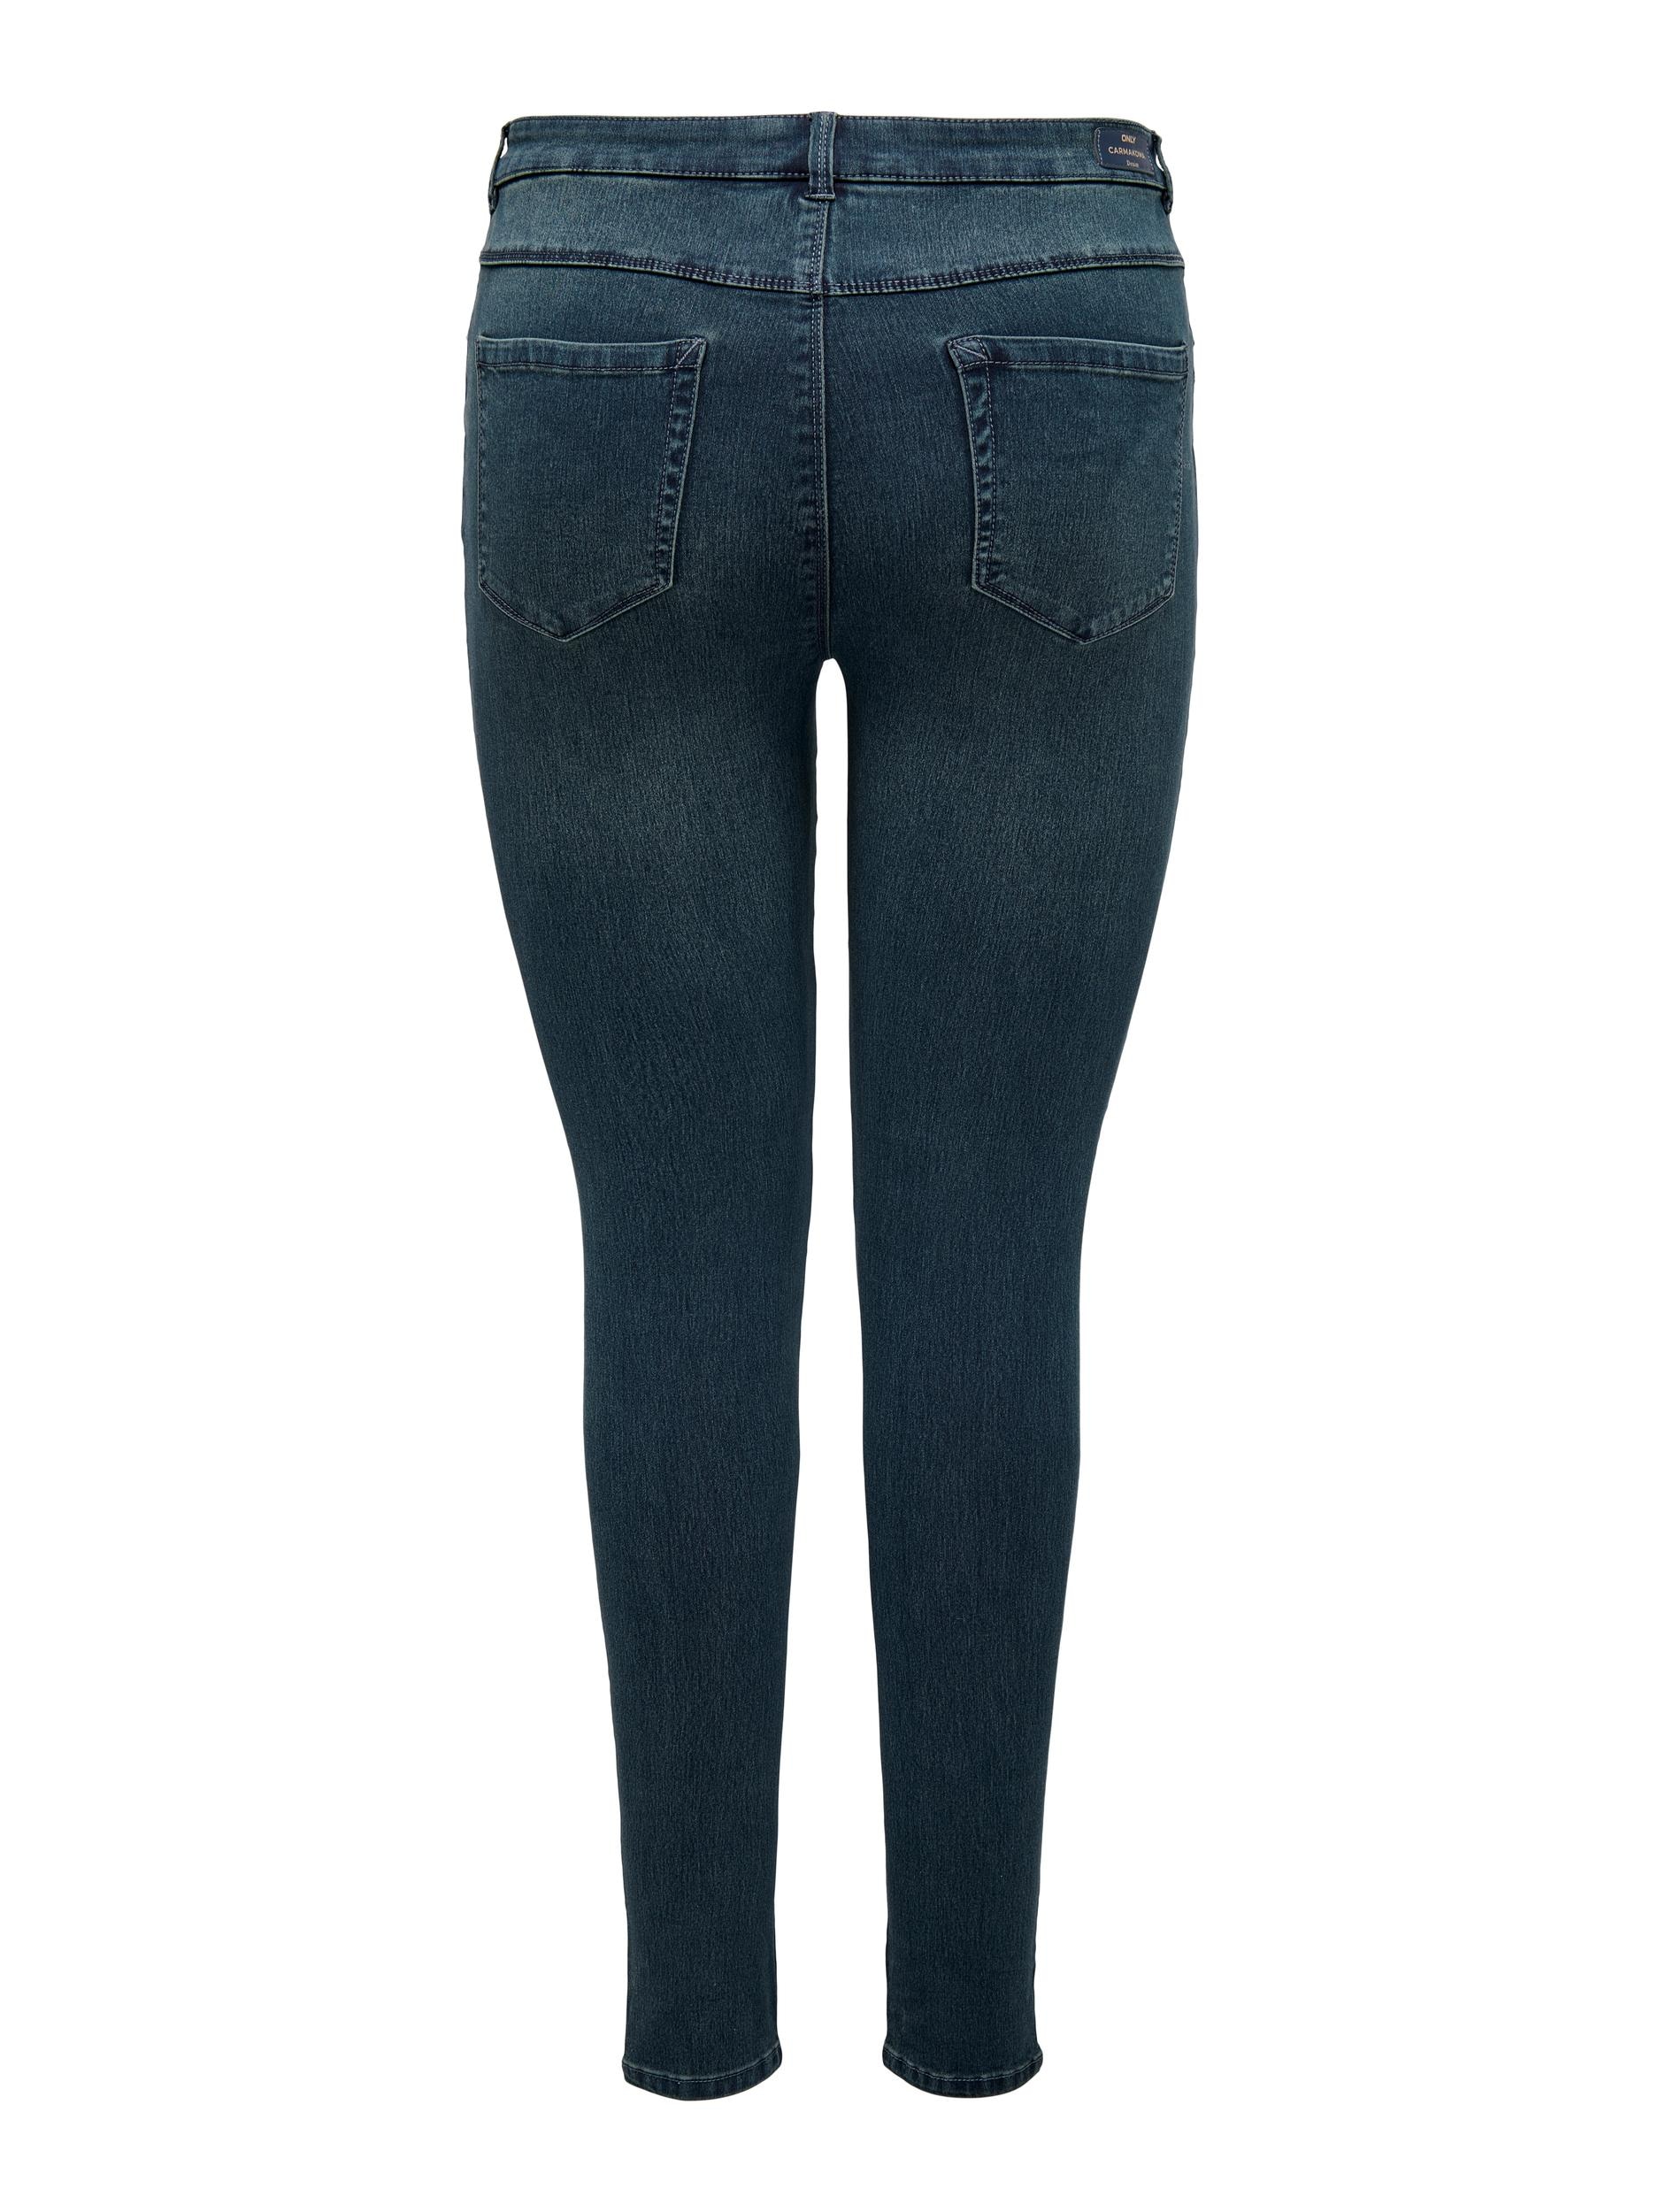 ♕ BJ558 bei SKINNY ONLY HW »CARAUGUSTA DNM CARMAKOMA NOOS« Skinny-fit-Jeans